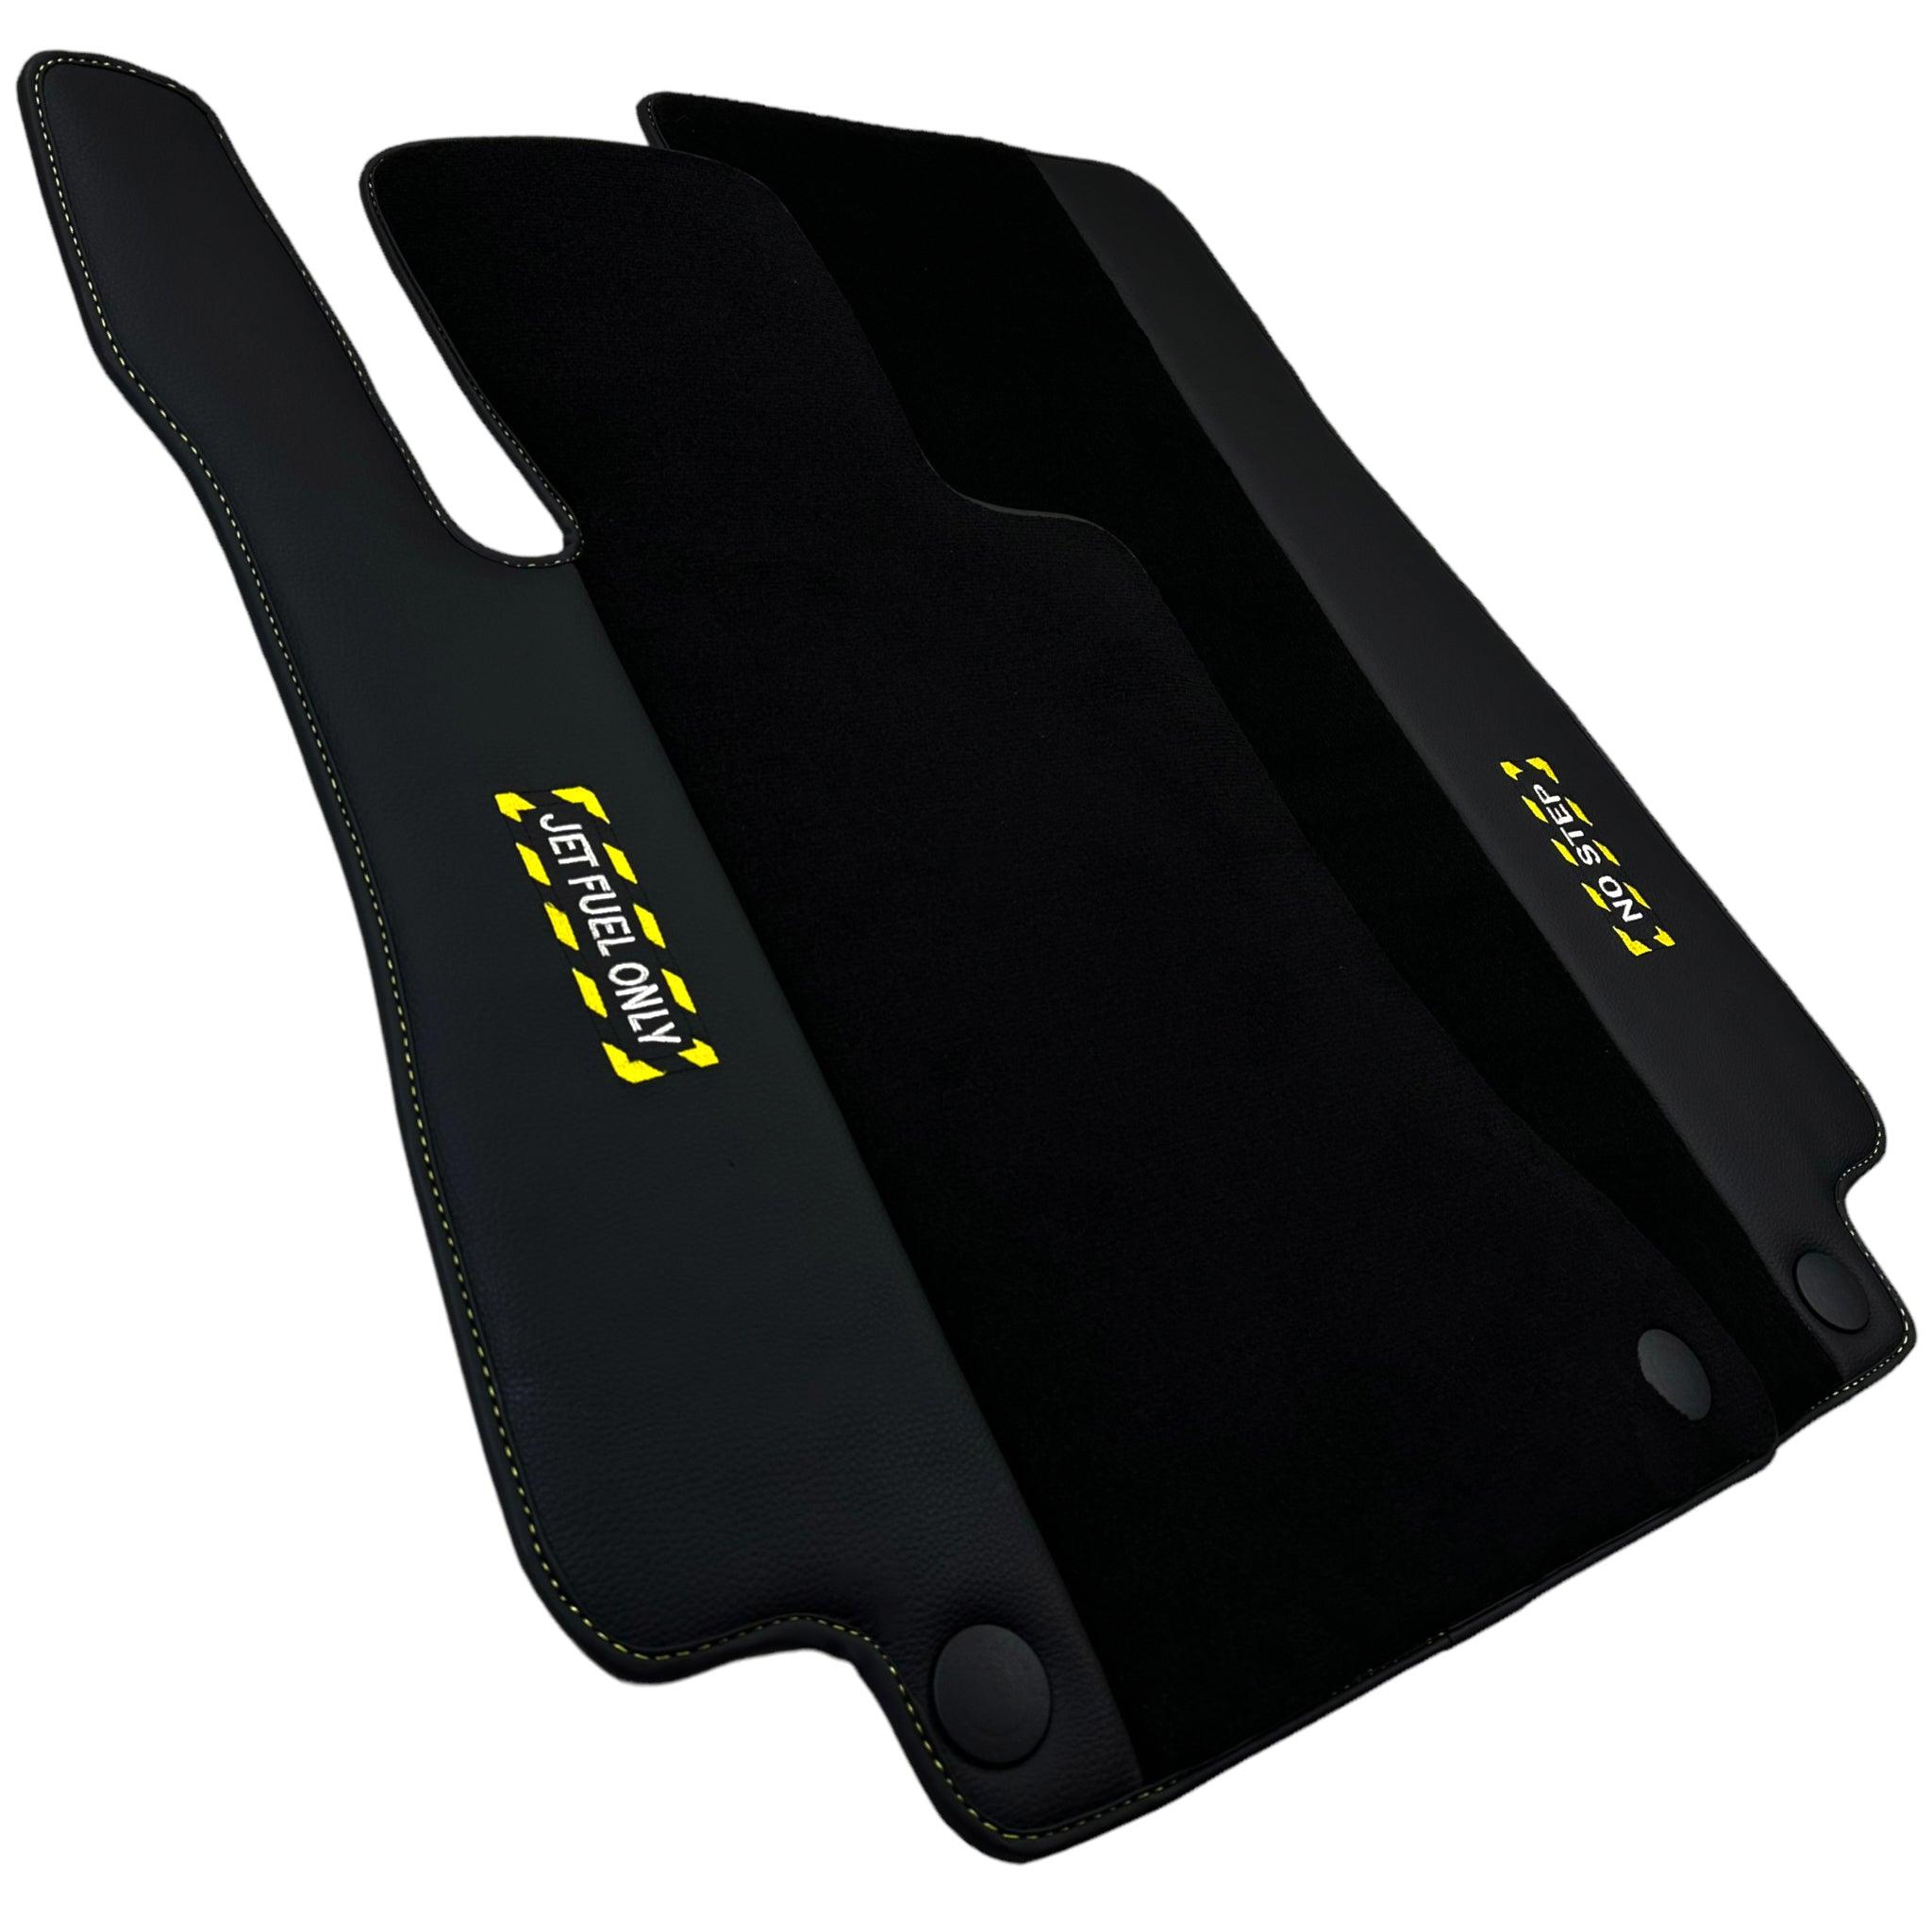 Black Floor Mats For Mercedes Benz S-Class C126 Coupe (1981-1991) | Fighter Jet Edition